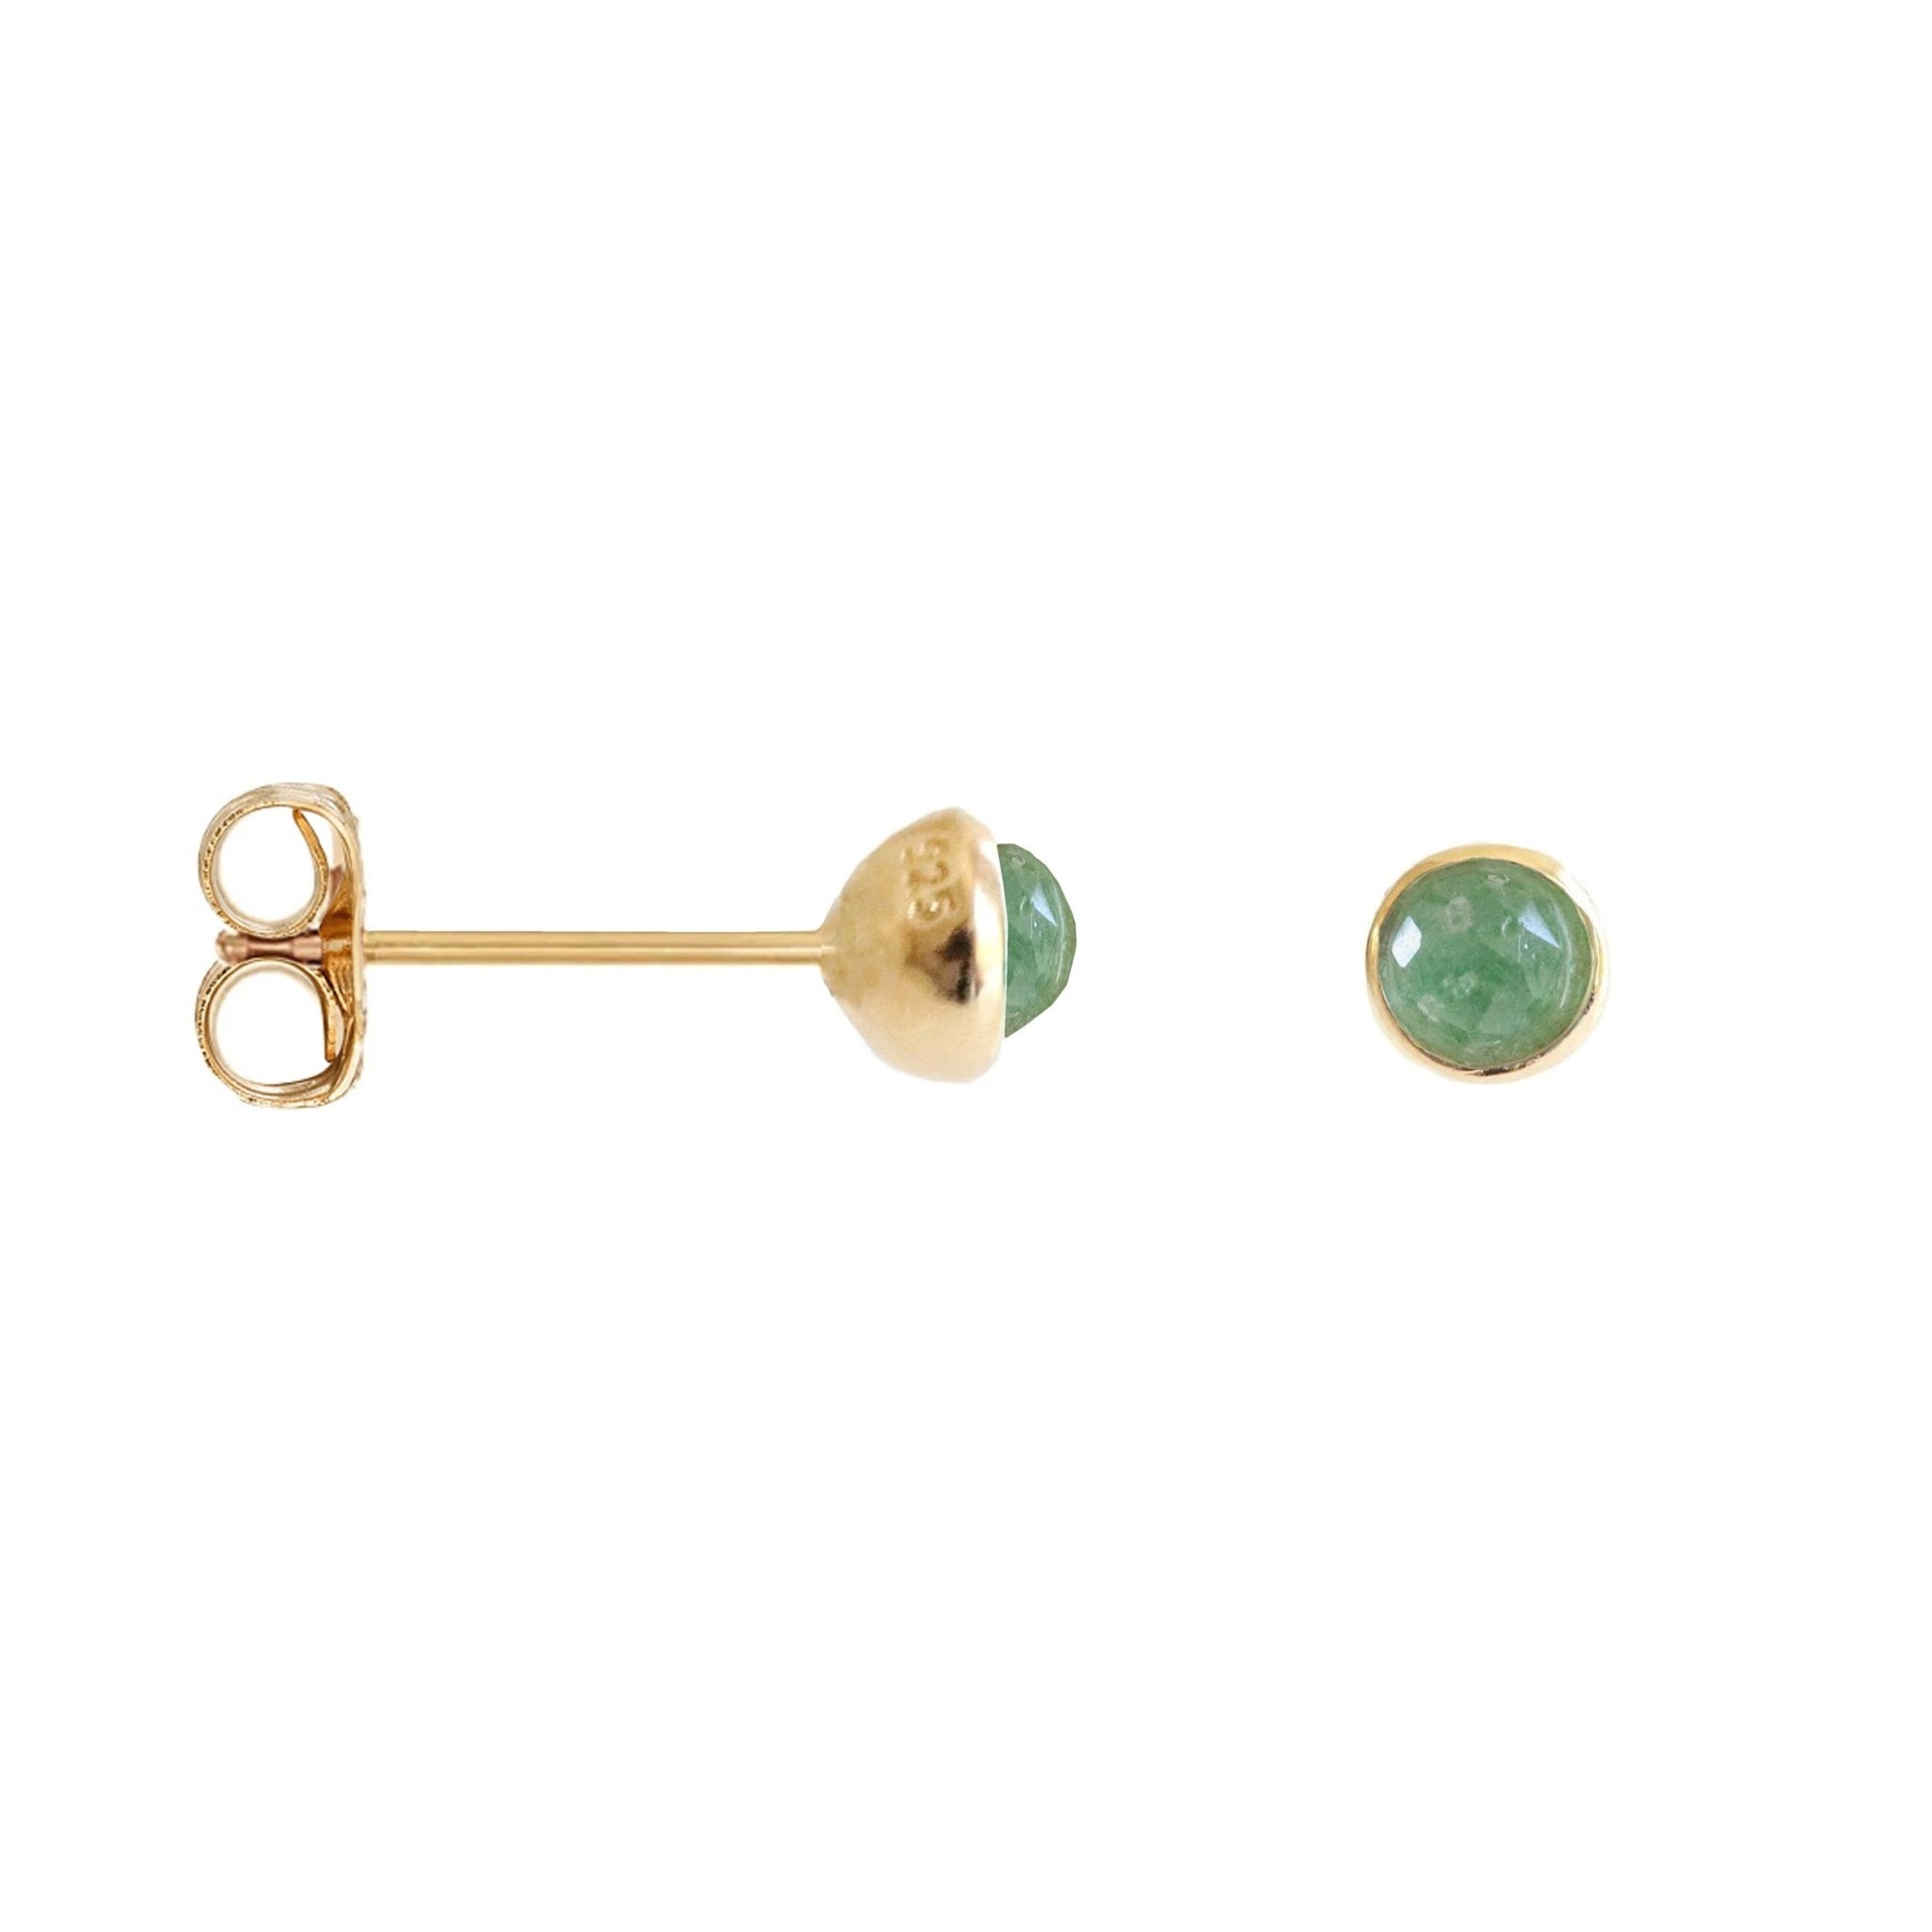 TINY PROTECT STUD EARRINGS - GREEN ONYX & GOLD - SO PRETTY CARA COTTER